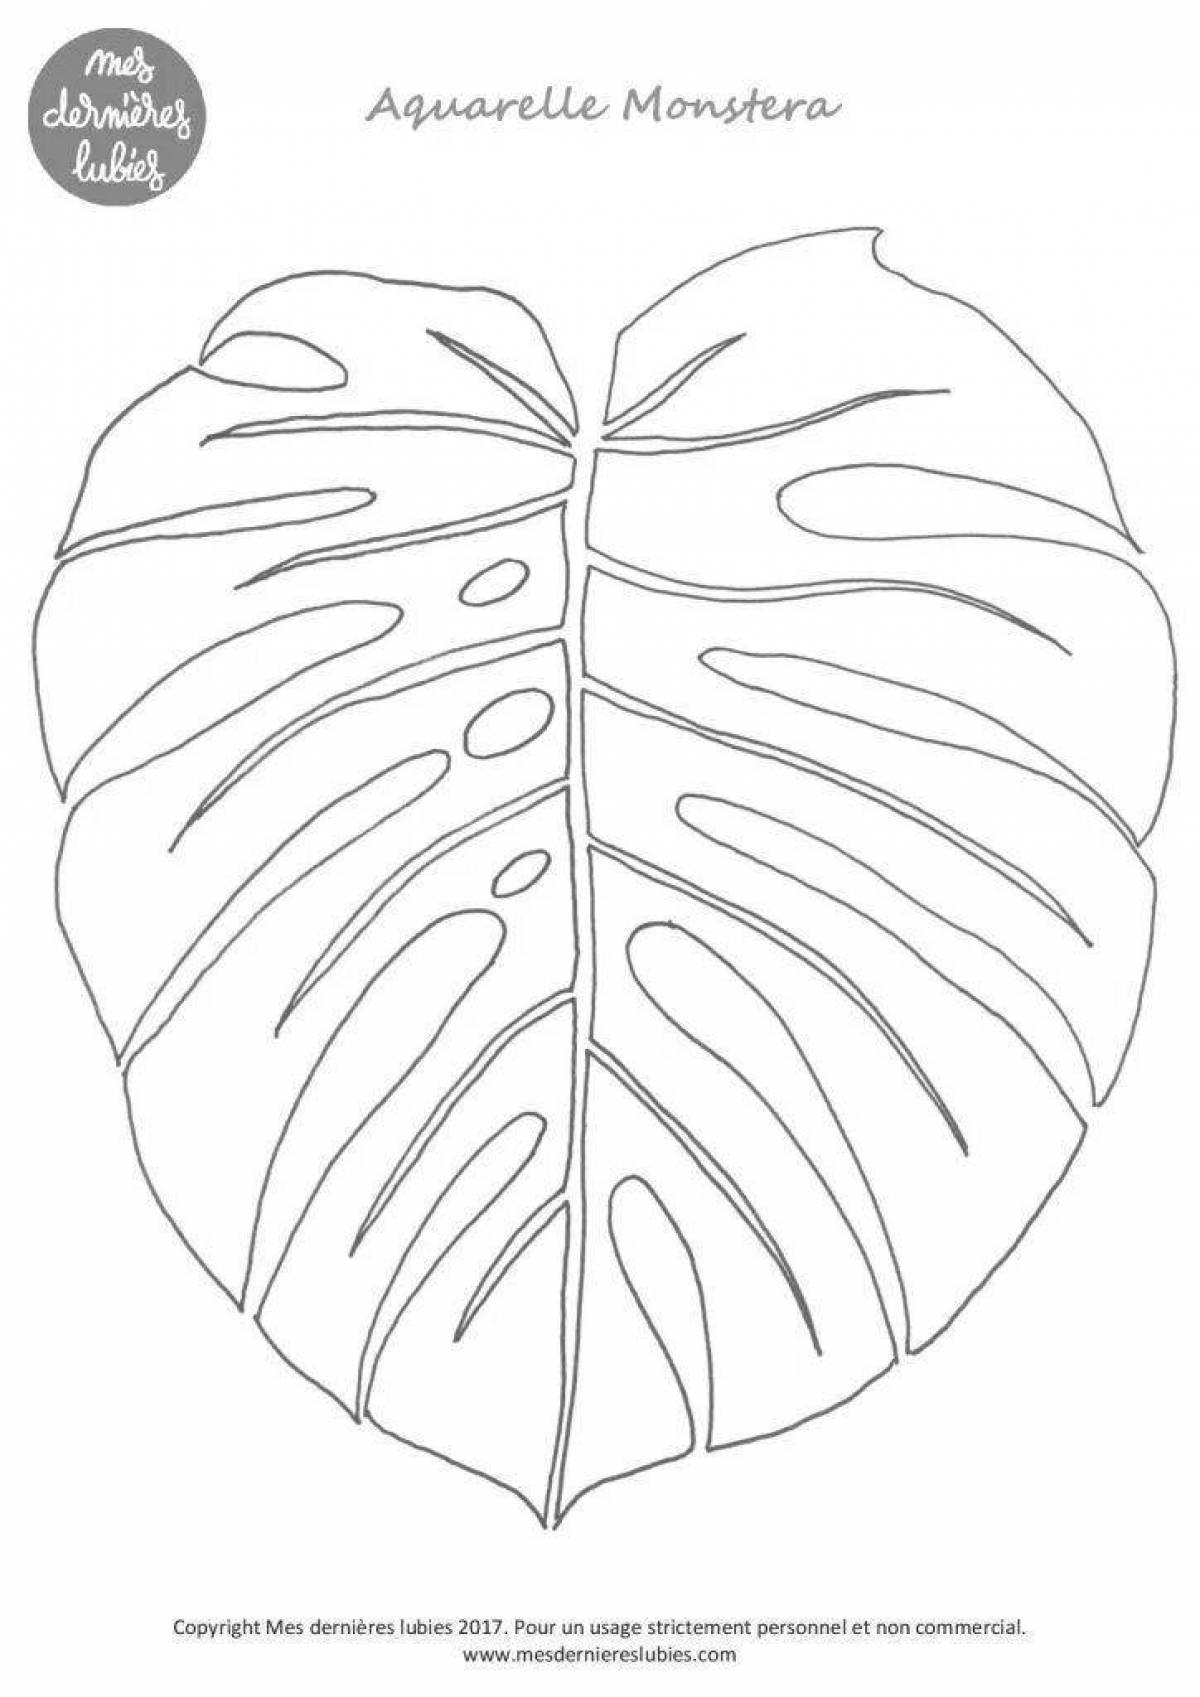 Coloring page happy monstera leaf